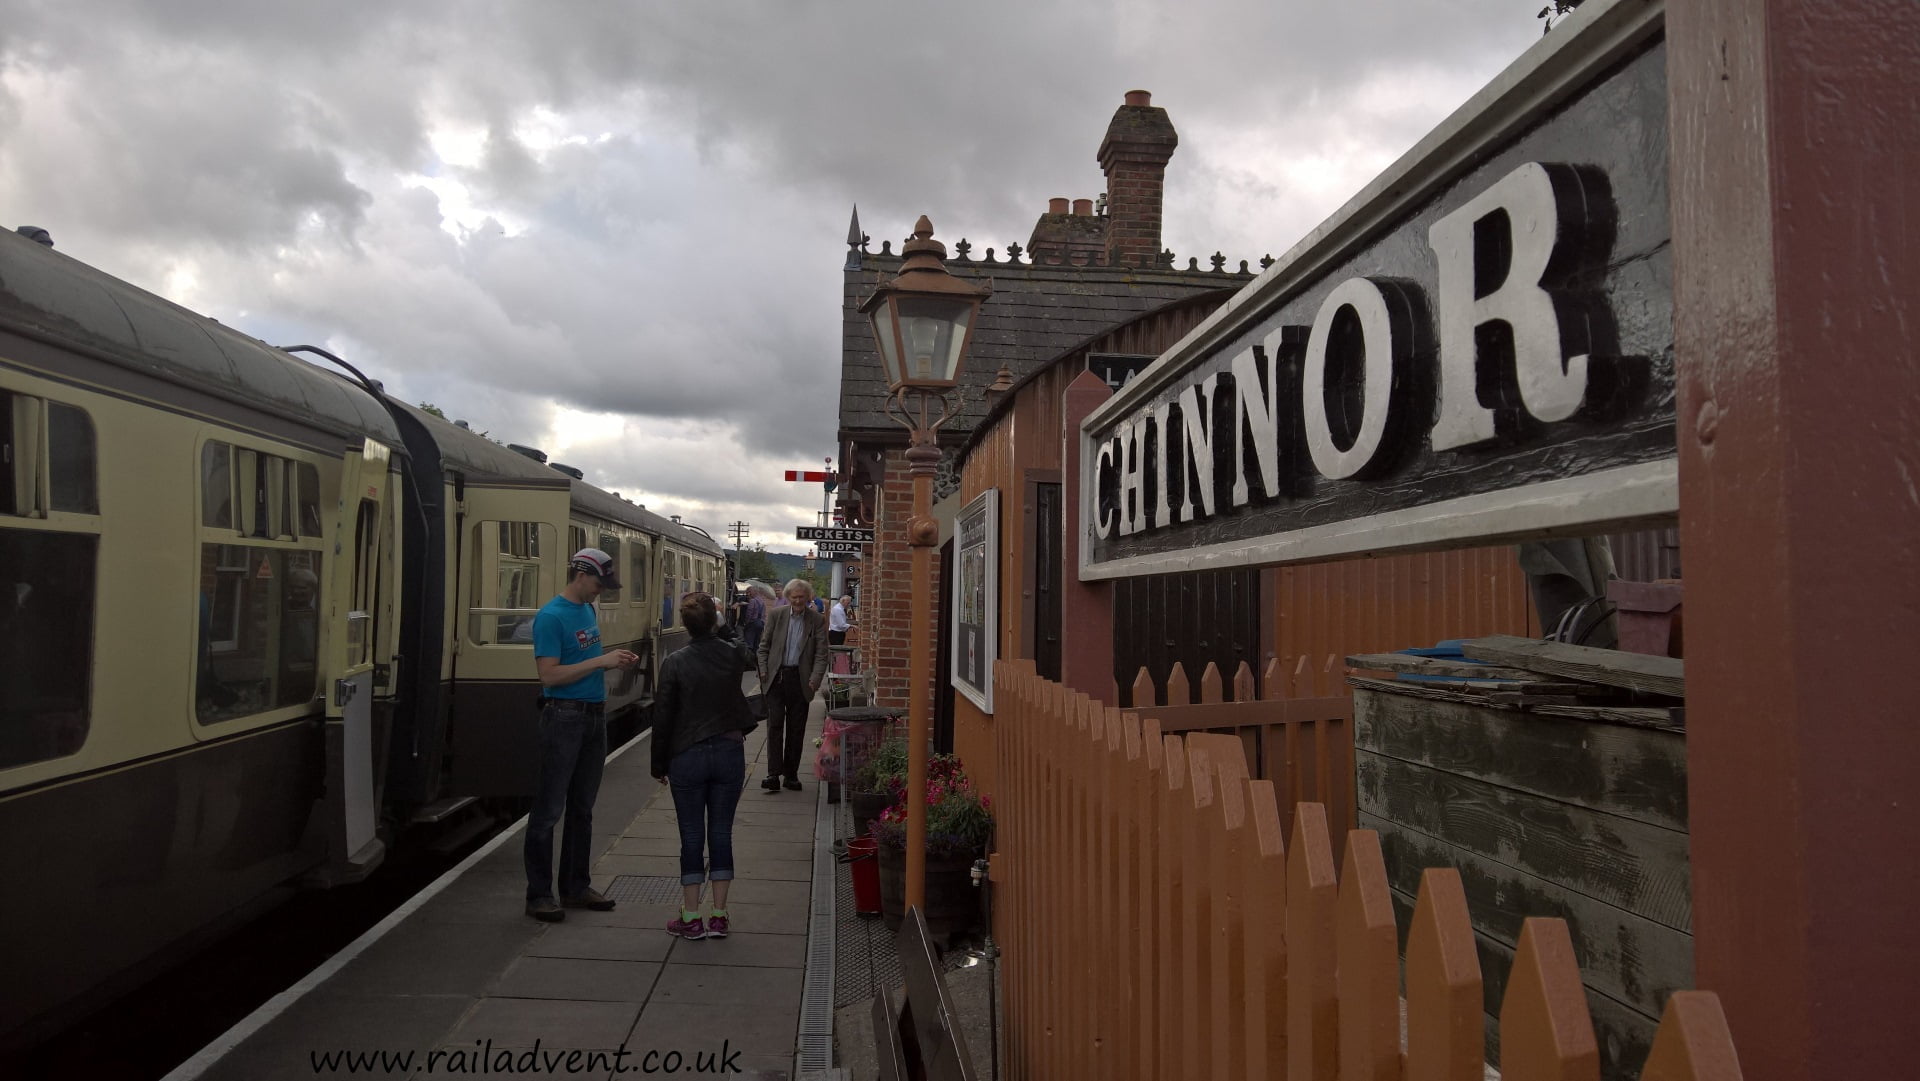 Chinnor Station - Chinnor and Princes Risborough Railway